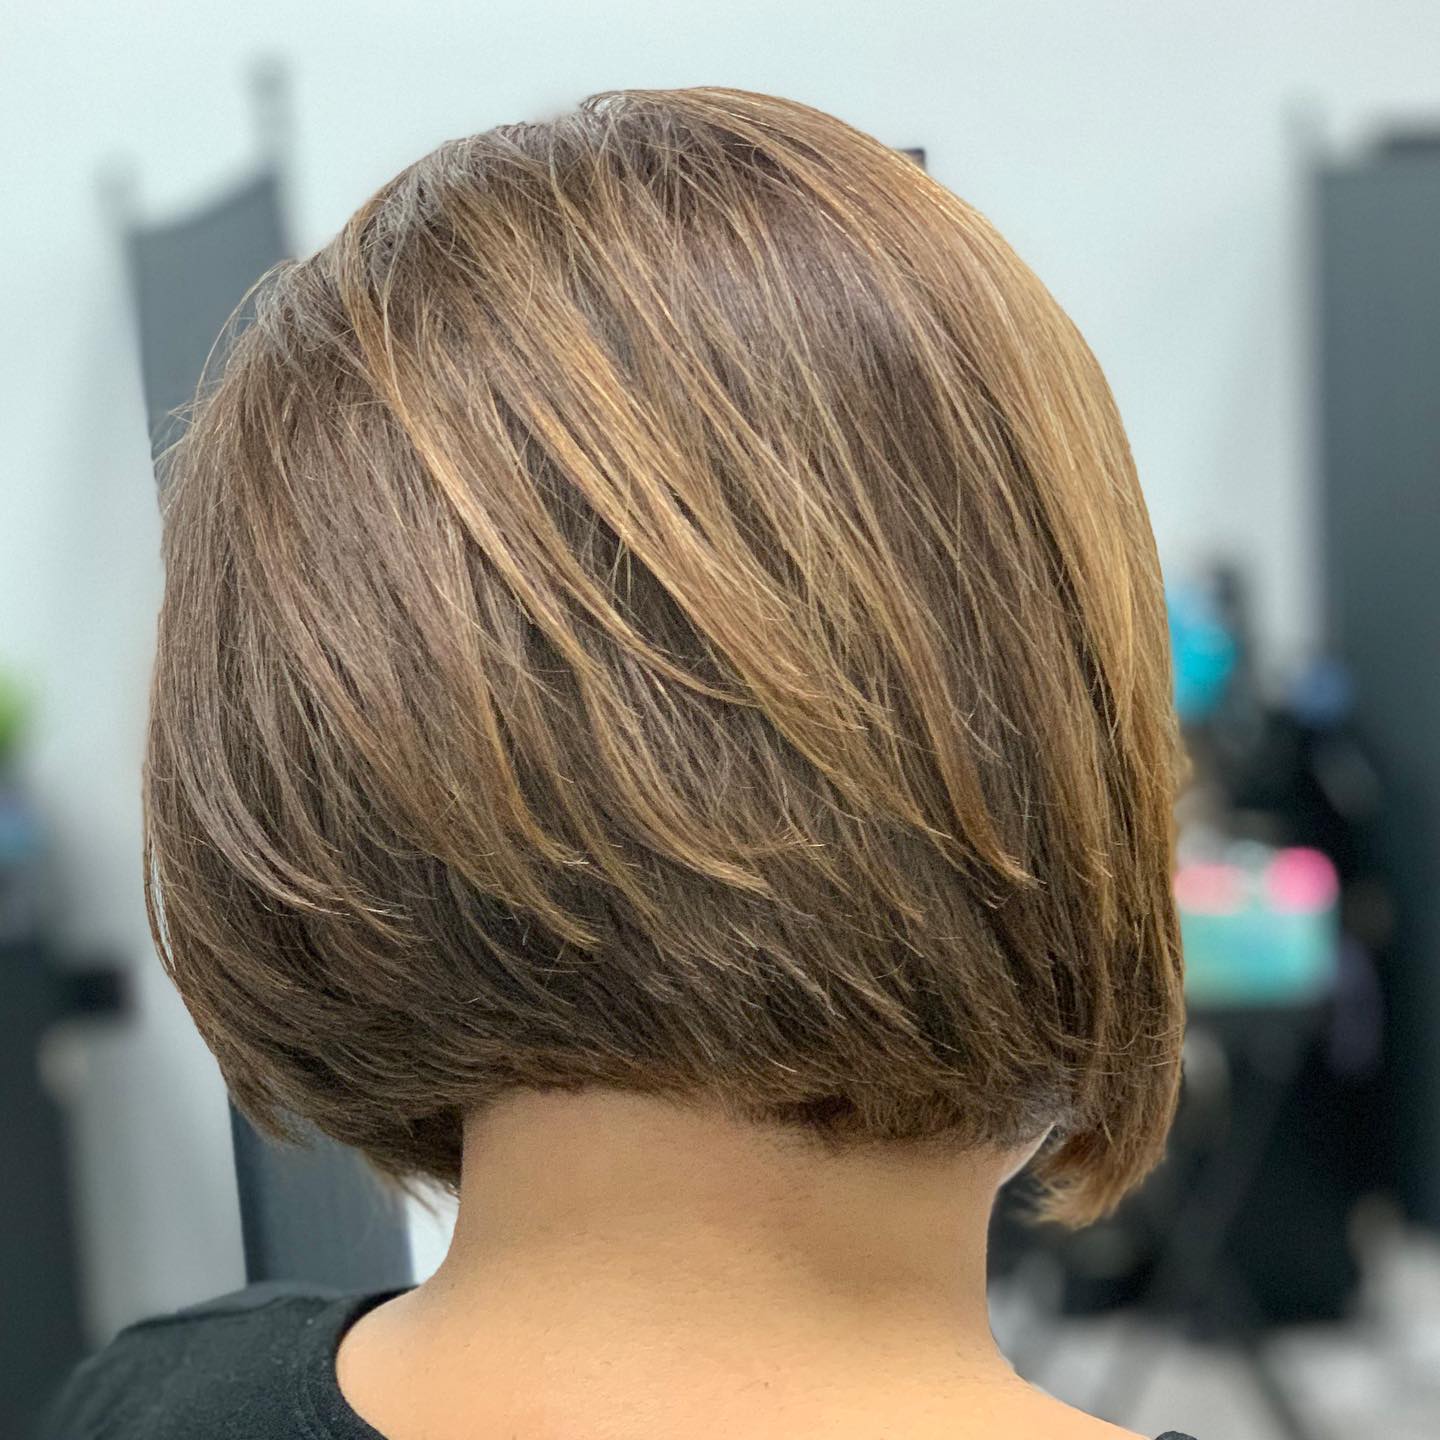 Stacked Bob 106 Long stacked bob | Medium length stacked bob | Pictures of stacked bob haircuts front and back Stacked Bob Hairstyles for Women